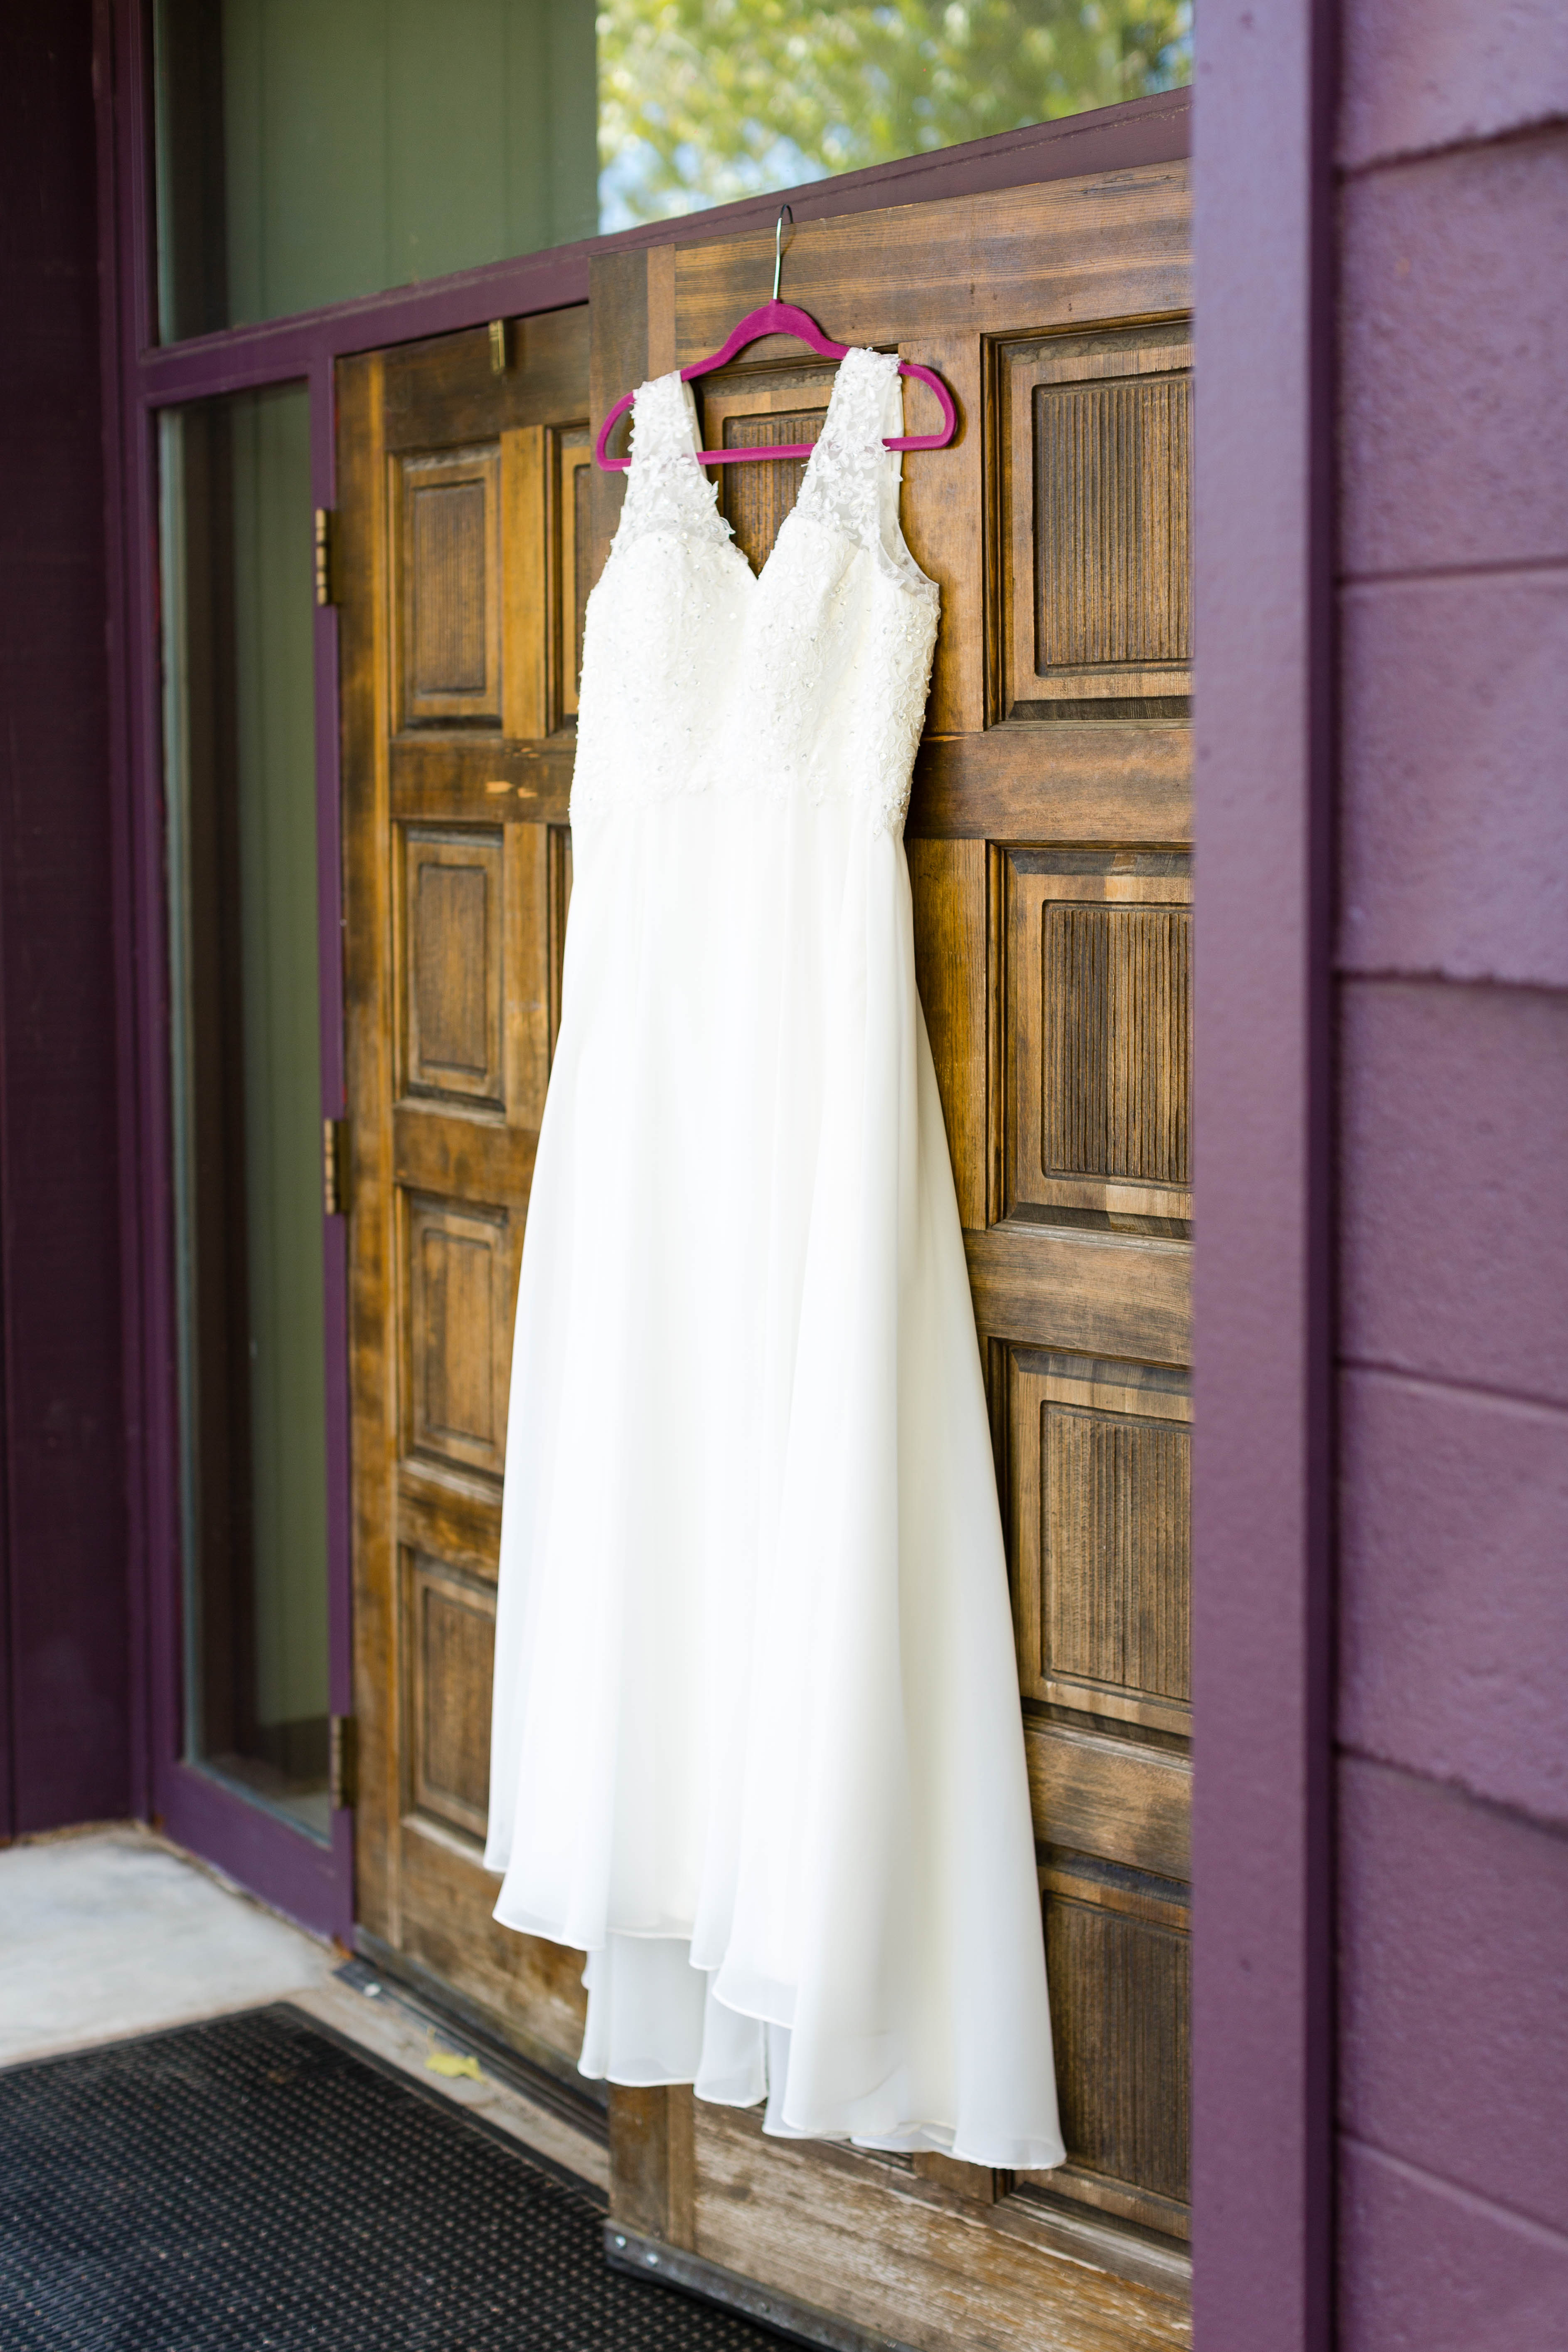 beaded lace wedding dress hanging from carved wooden doors